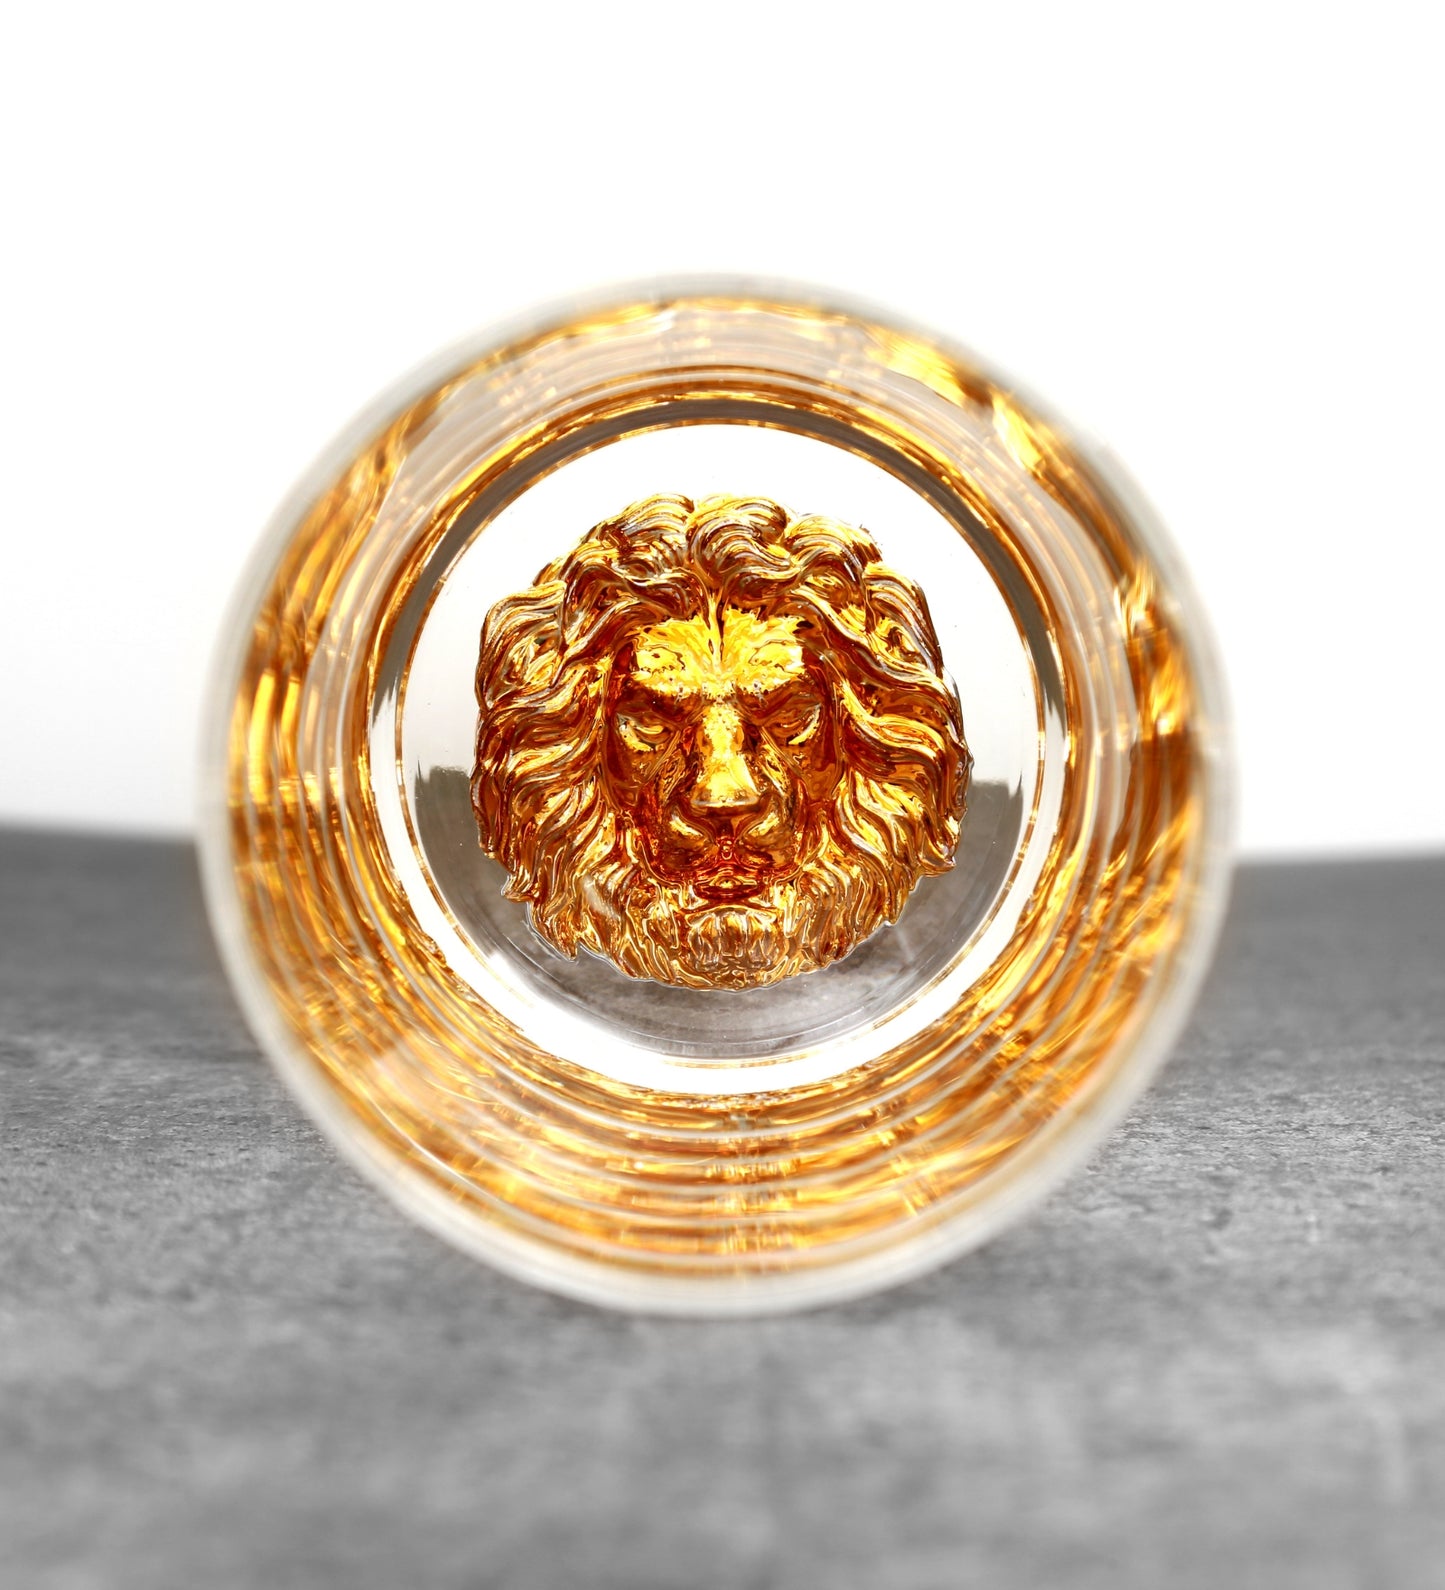 Melbify Unusual Gold Lion Label Whiskey Glass My Store Whiskey Glasses